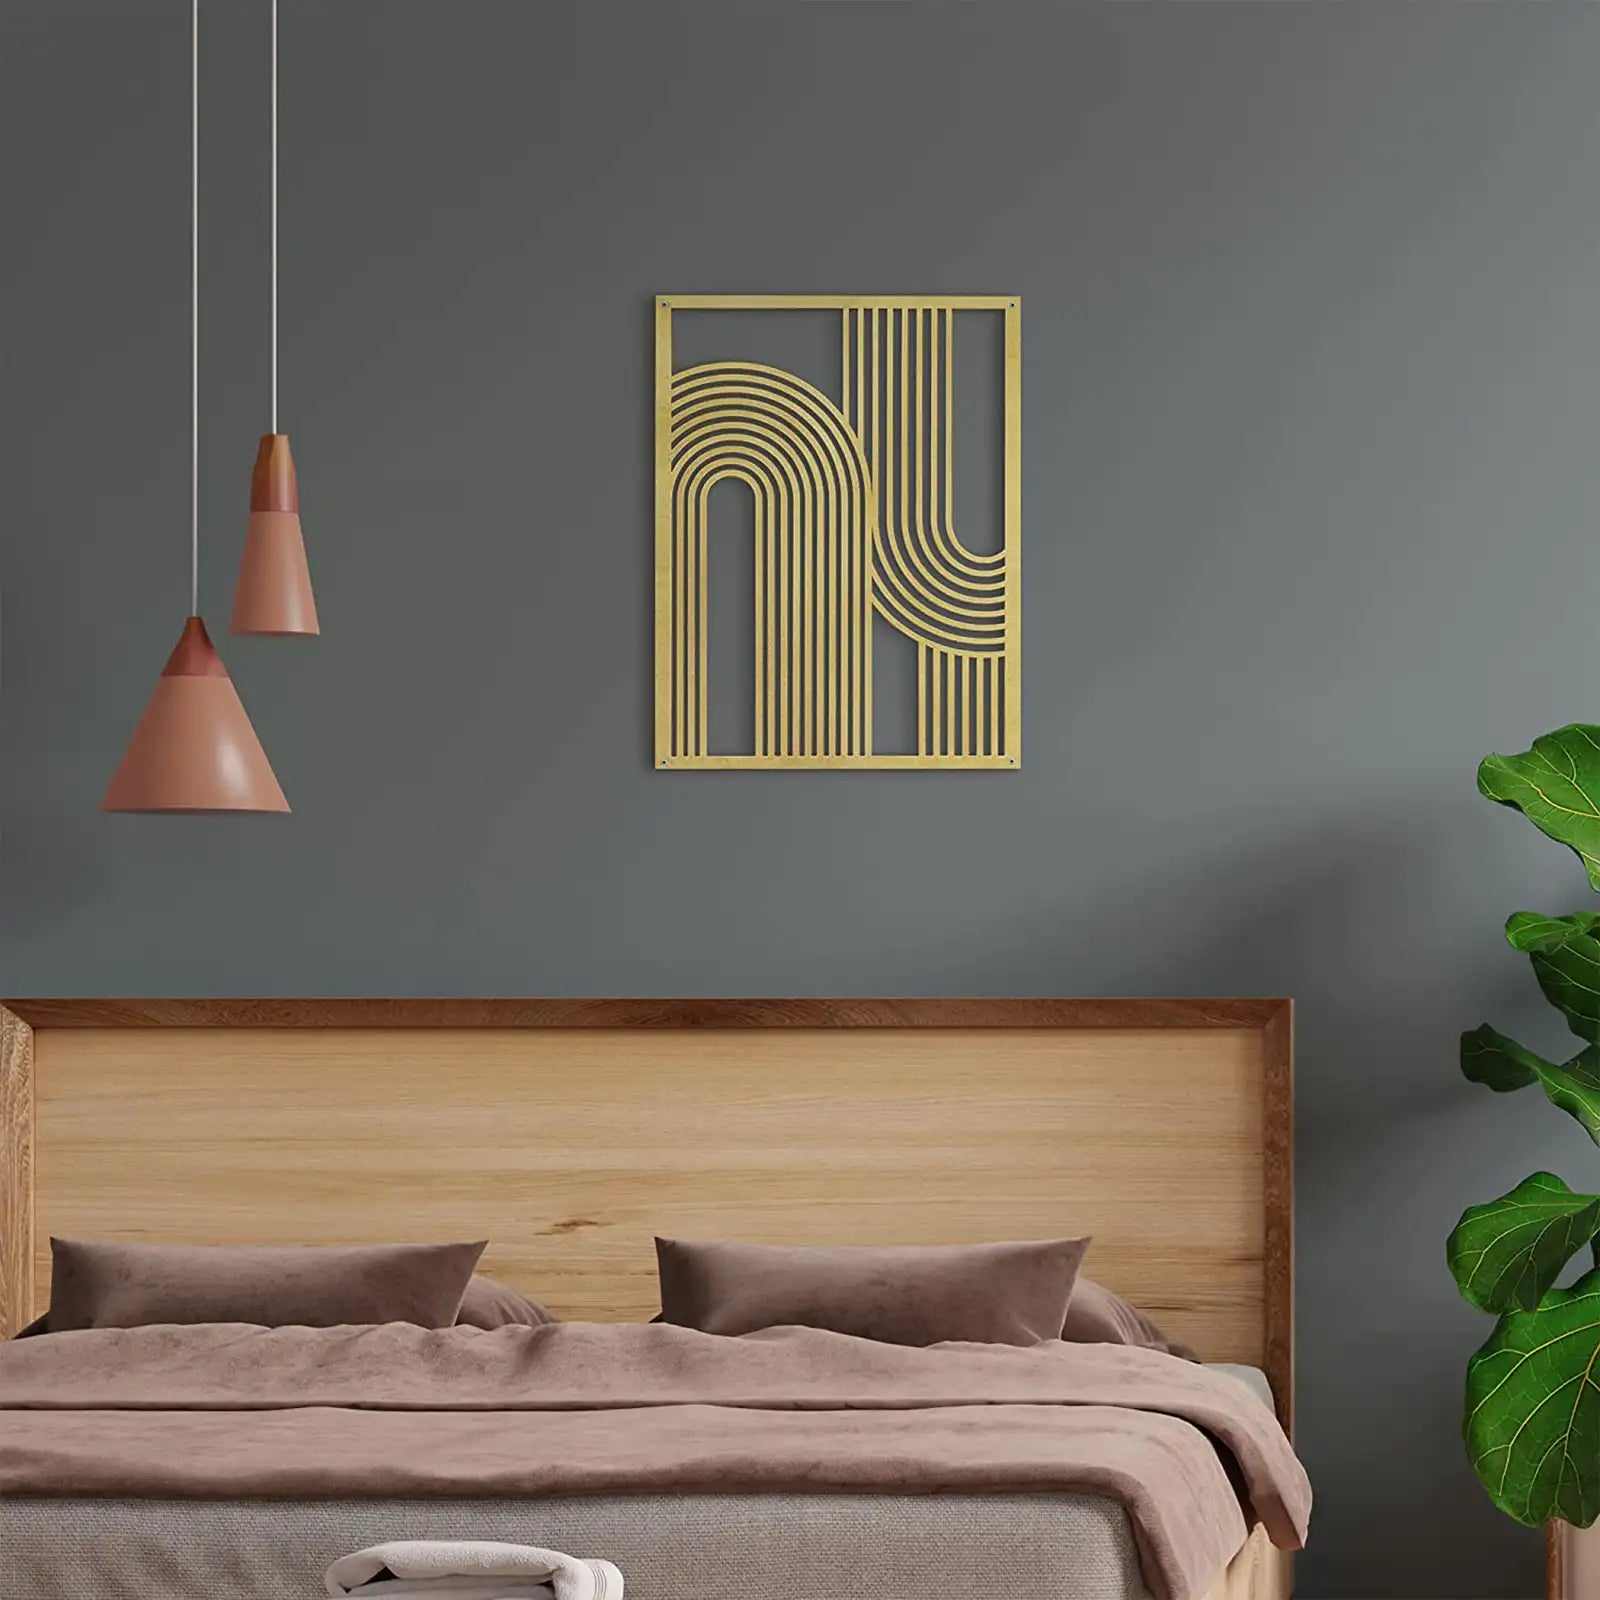 Mid Century Geometric Line Metal Wall Art, Gold Abstract Geometric Modern Art Boho Wall Sculptures for Living Room, Bedroom, Office